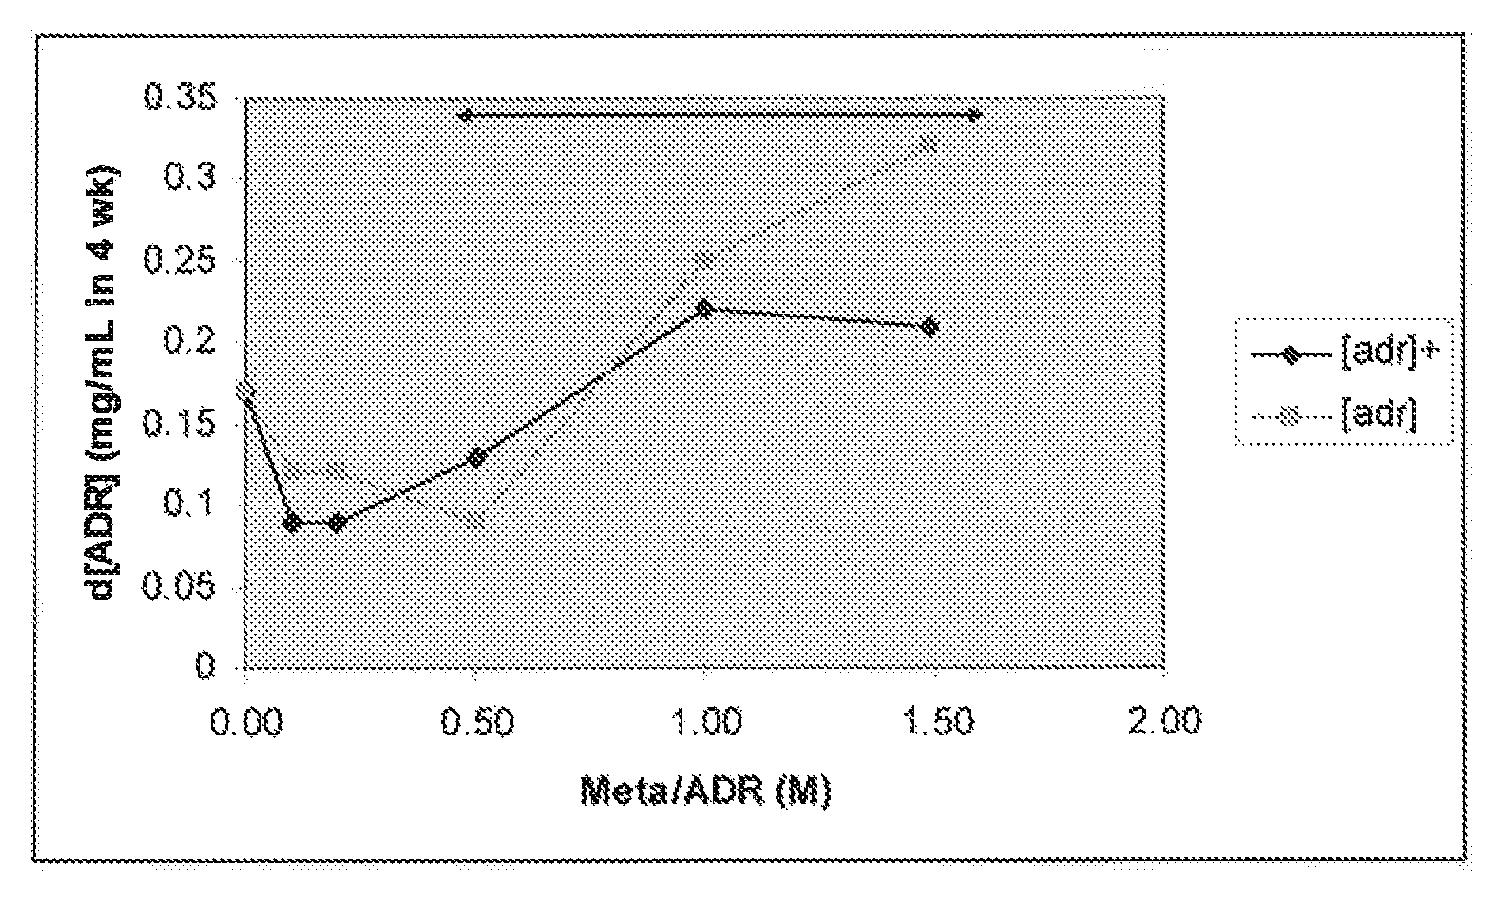 Stabilized composition comprising at least one adrenergic compound